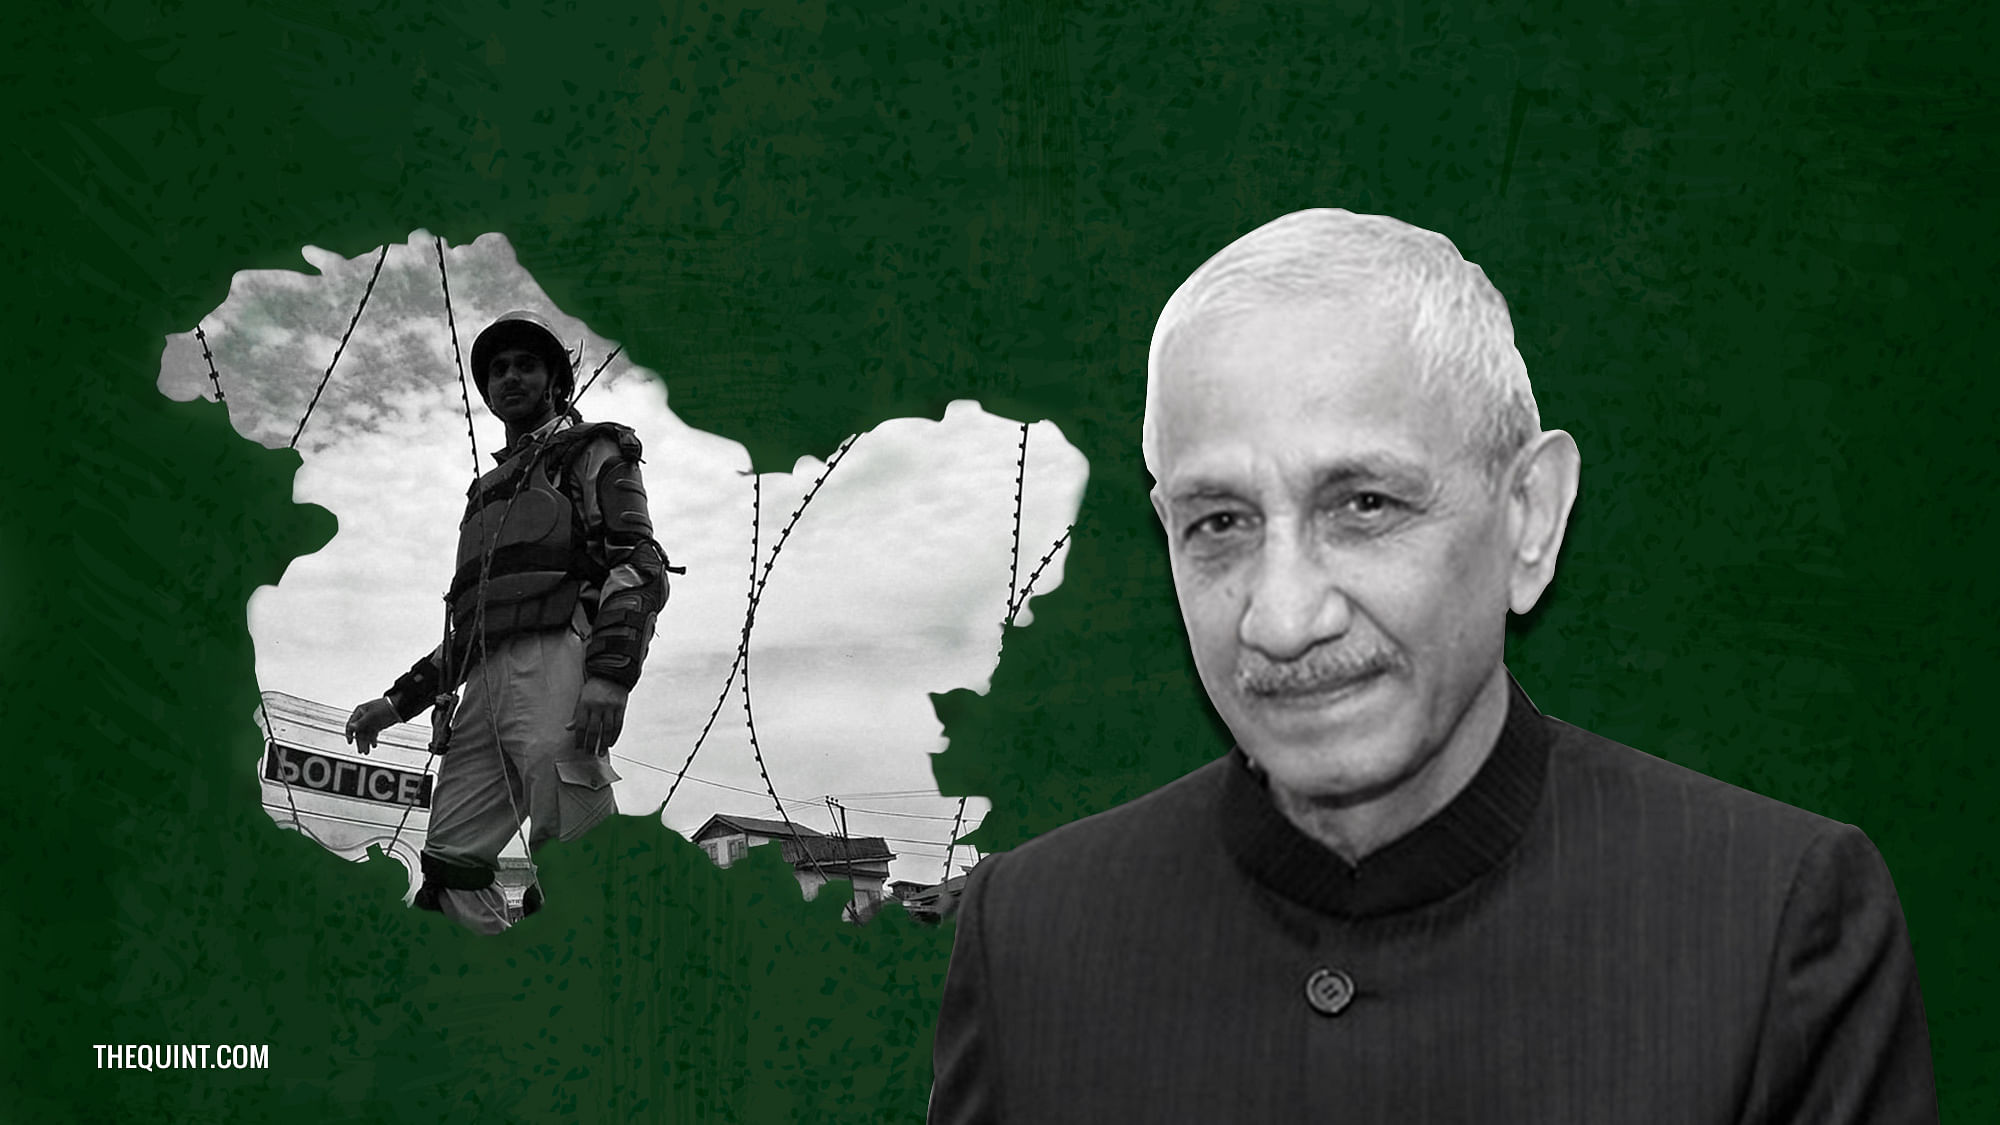 Even as the Centre’s interlocutor, Dineshwar Sharma visits the valley, hopes of a way forward have dimmed further.